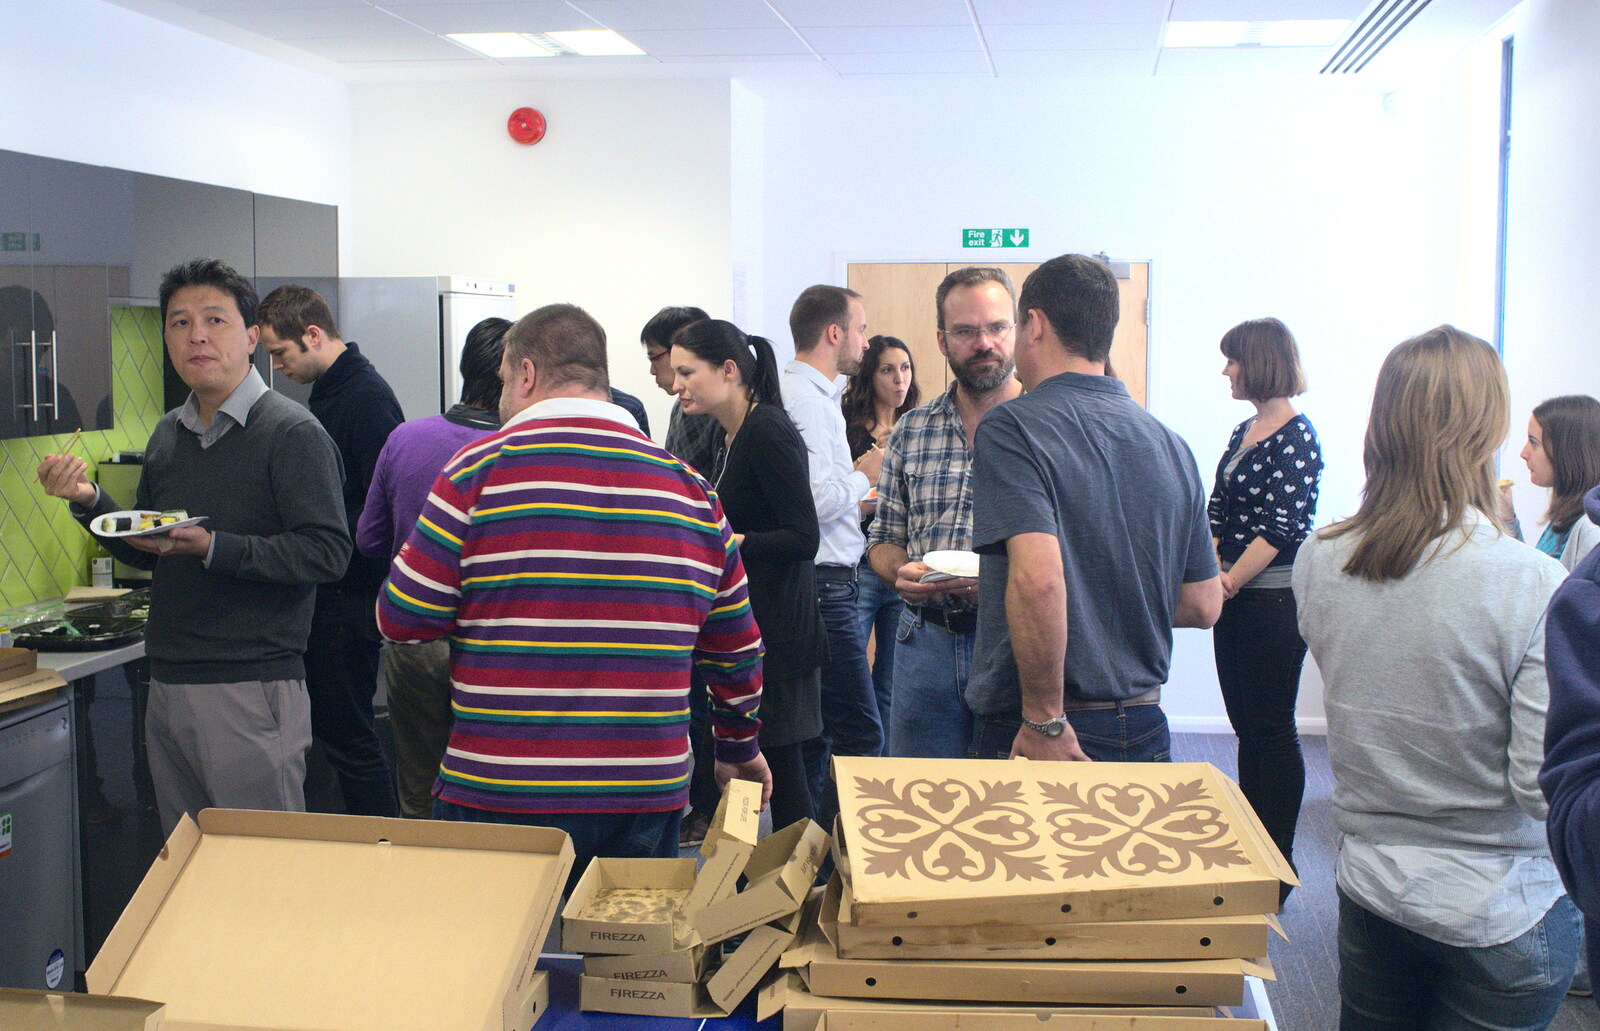 Office mingling and pizza boxes from TouchType Office Life and Pizza, Southwark, London - 20th October 2012